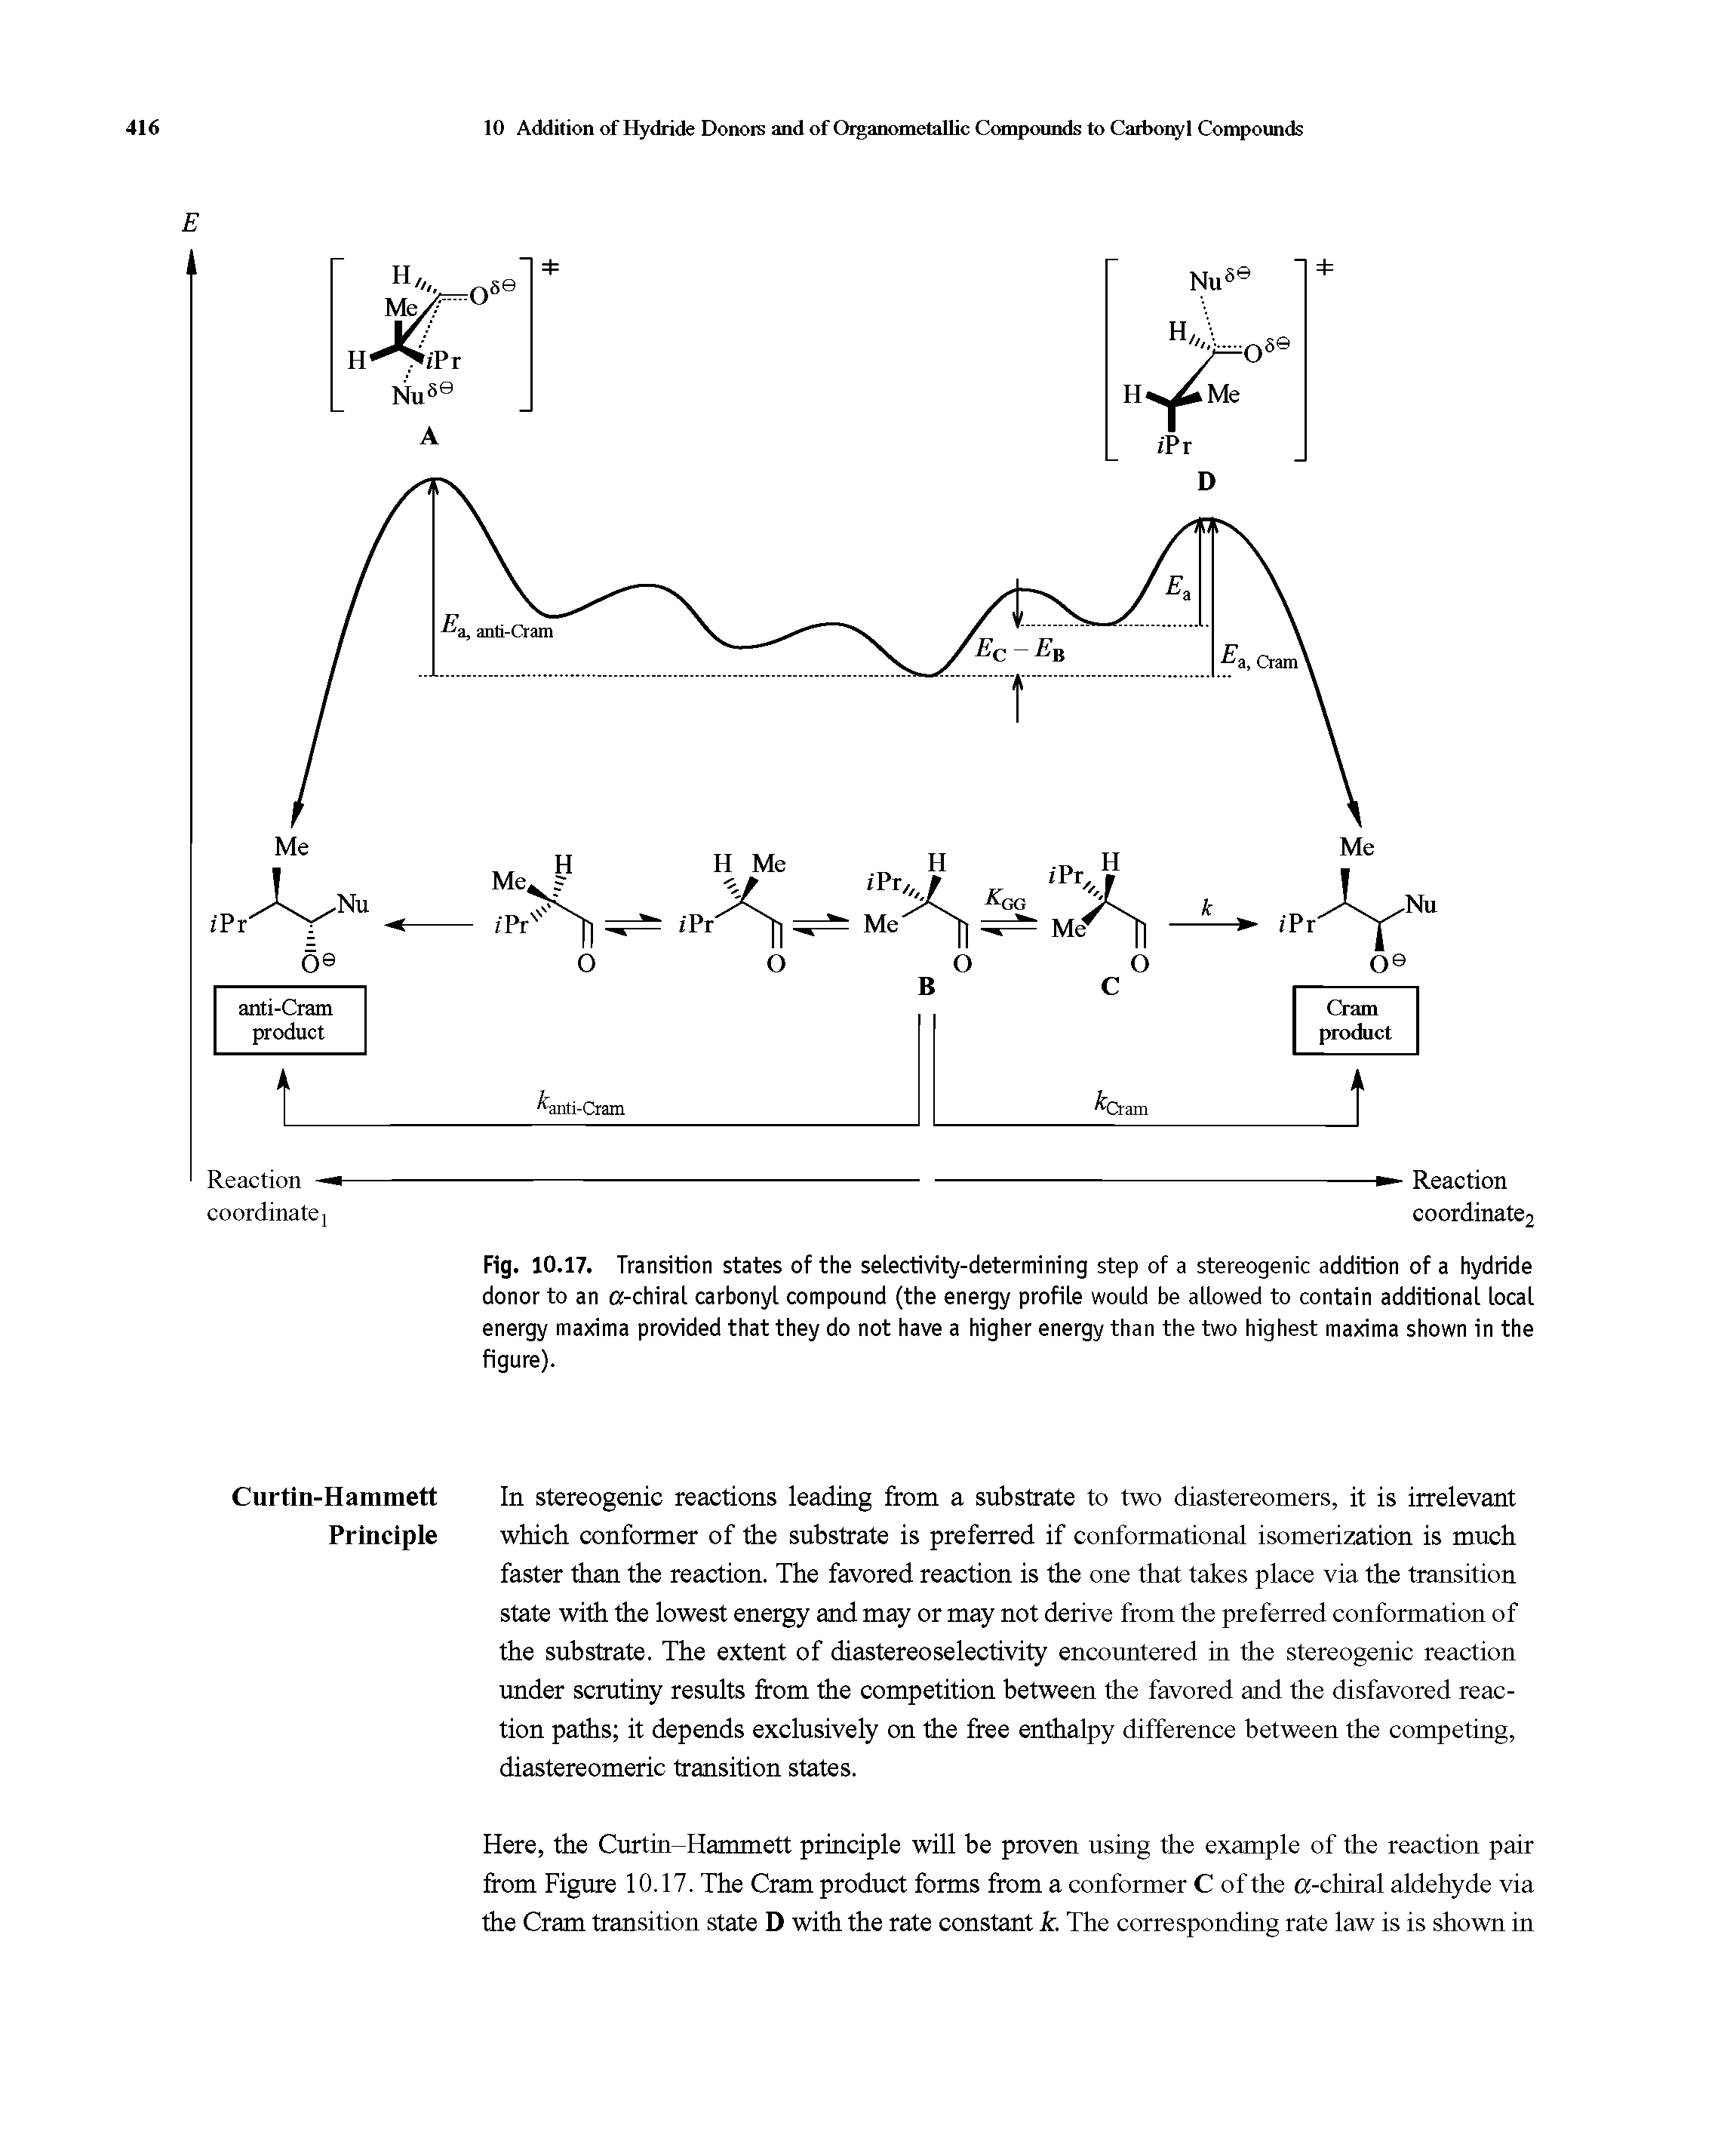 Fig. 10.17. Transition states of the selectivity-determining step of a stereogenic addition of a hydride donor to an a-chiral carbonyl compound (the energy profile would be allowed to contain additional local energy maxima provided that they do not have a higher energy than the two highest maxima shown in the figure).